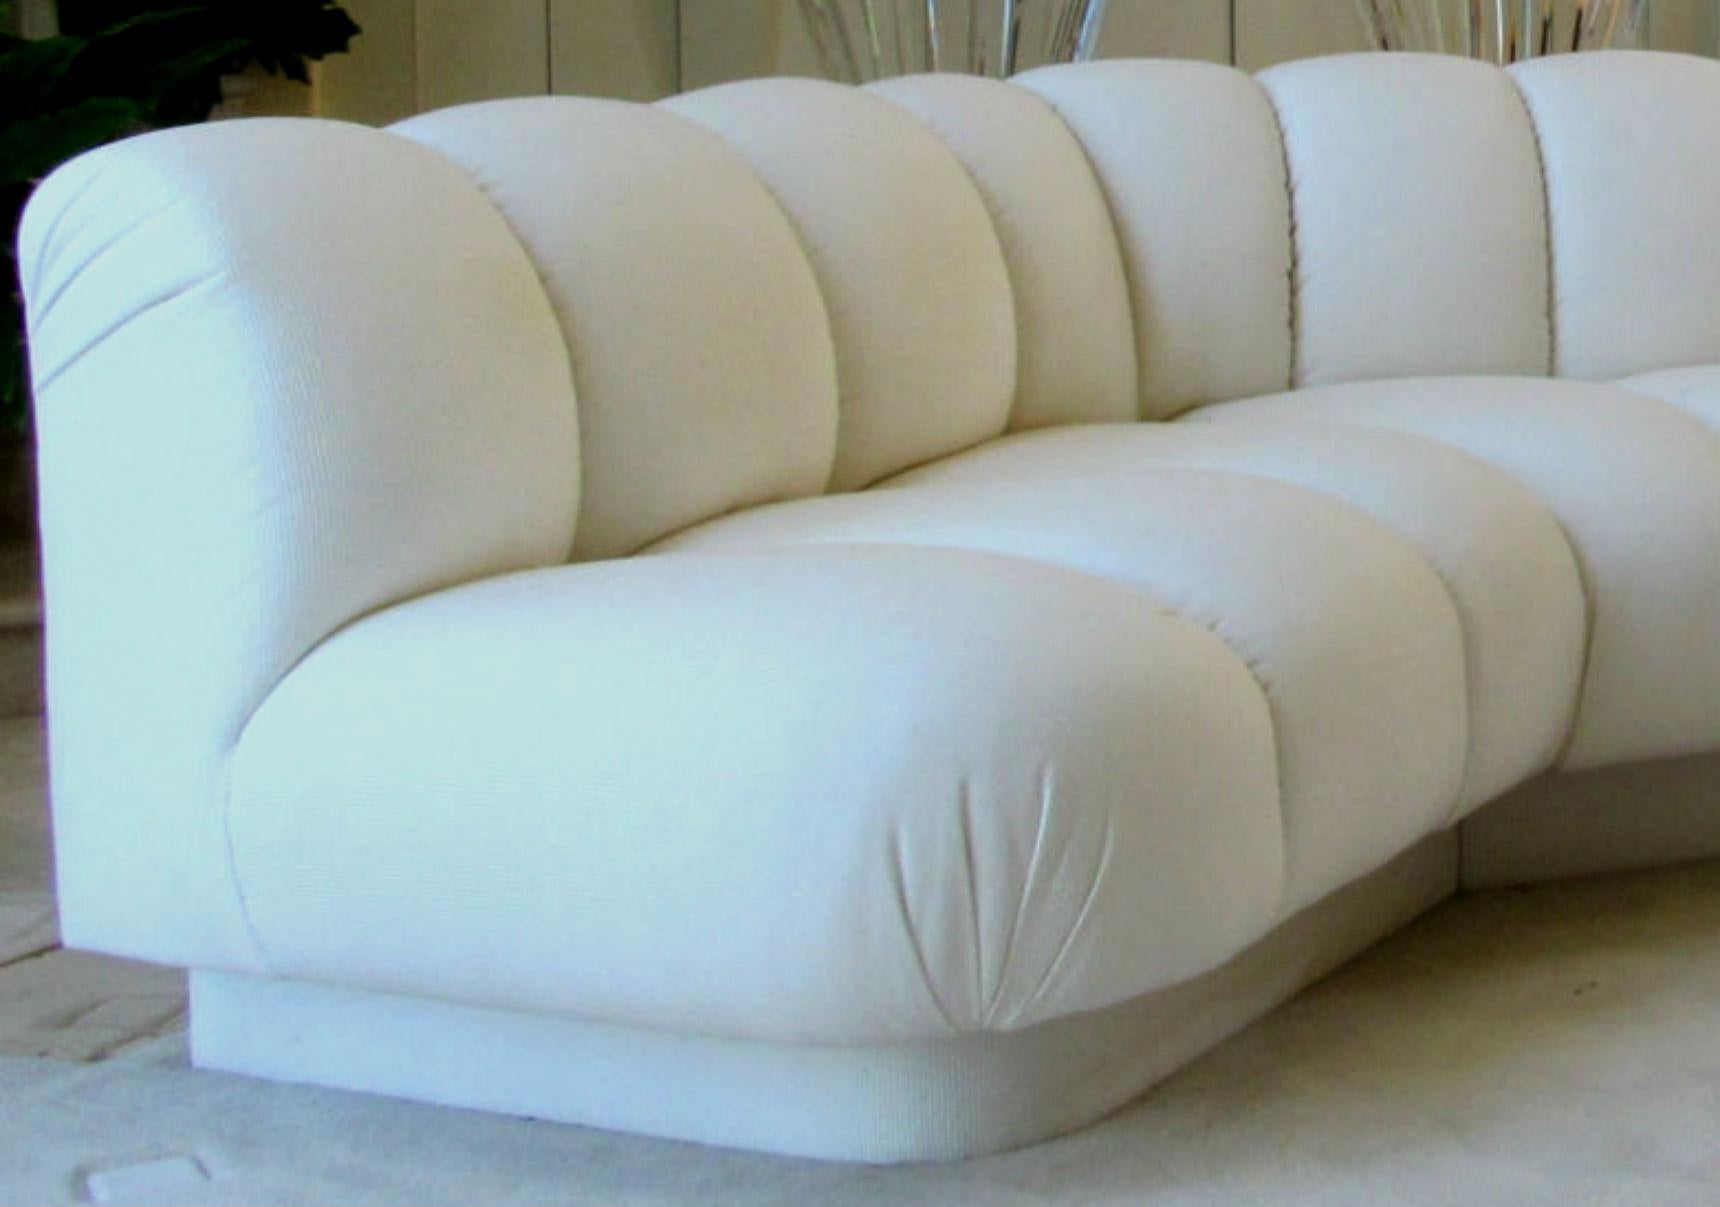 Channel tufted modern sectional sofa by designer Steve Chase. Three piece sectional sofa upholstered in white railroad corduroy fabric. Channel Tufting in signature Steve Chase style, this sofa is both beautiful and very comfortable. Has clips